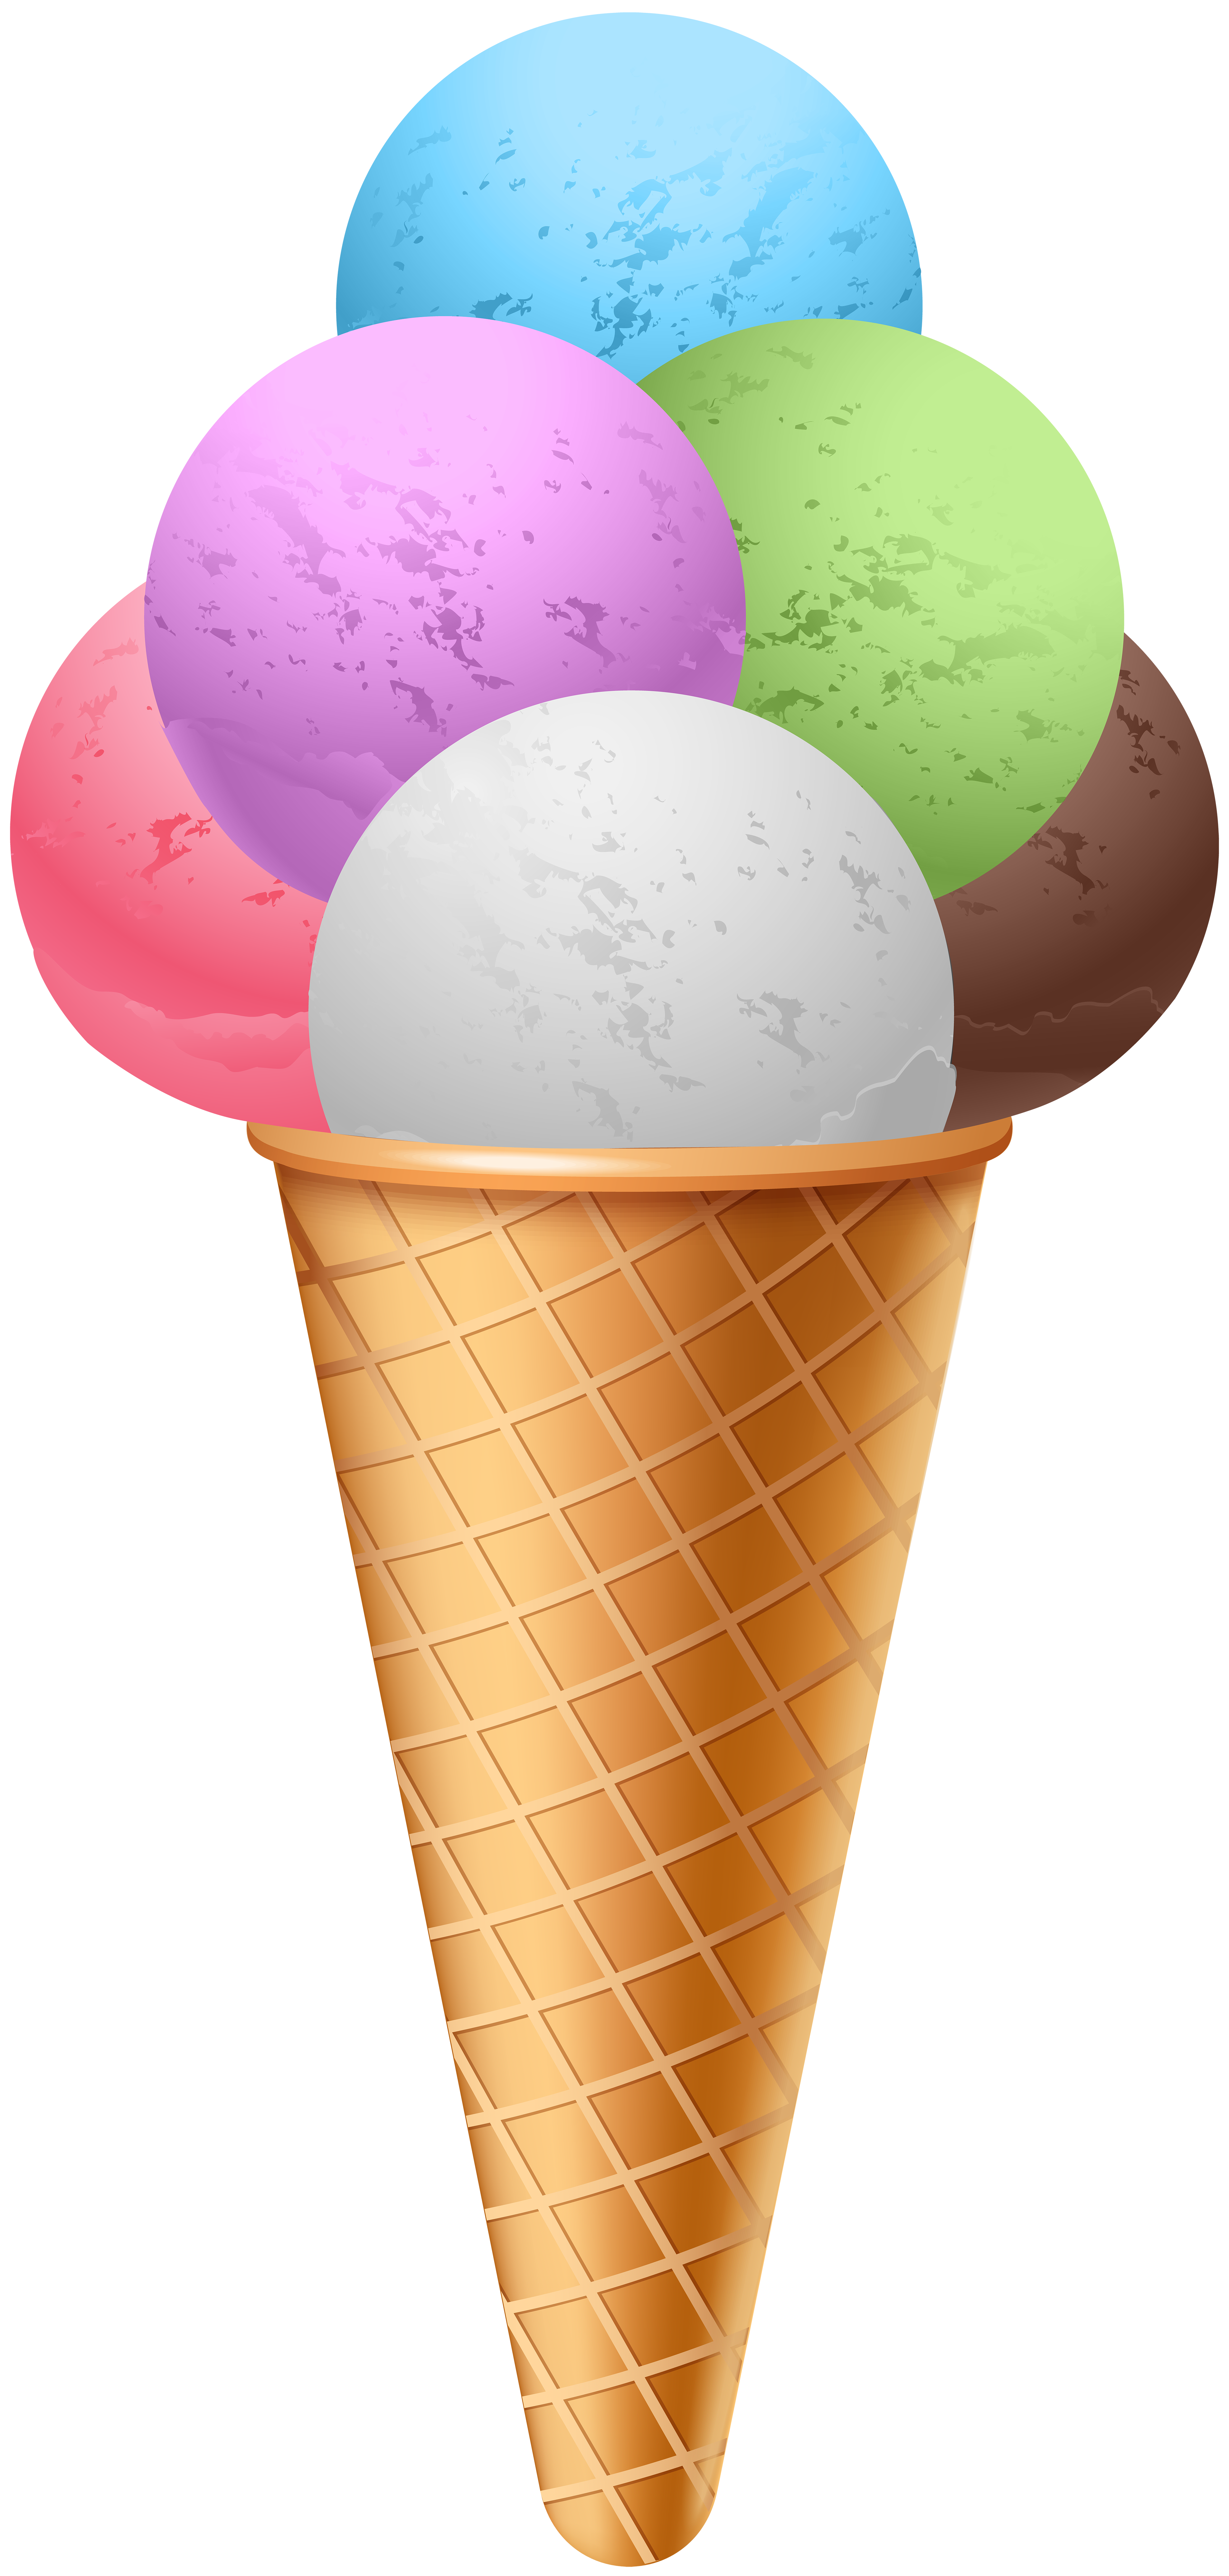 Halloween clipart ice cream. Big cone png image